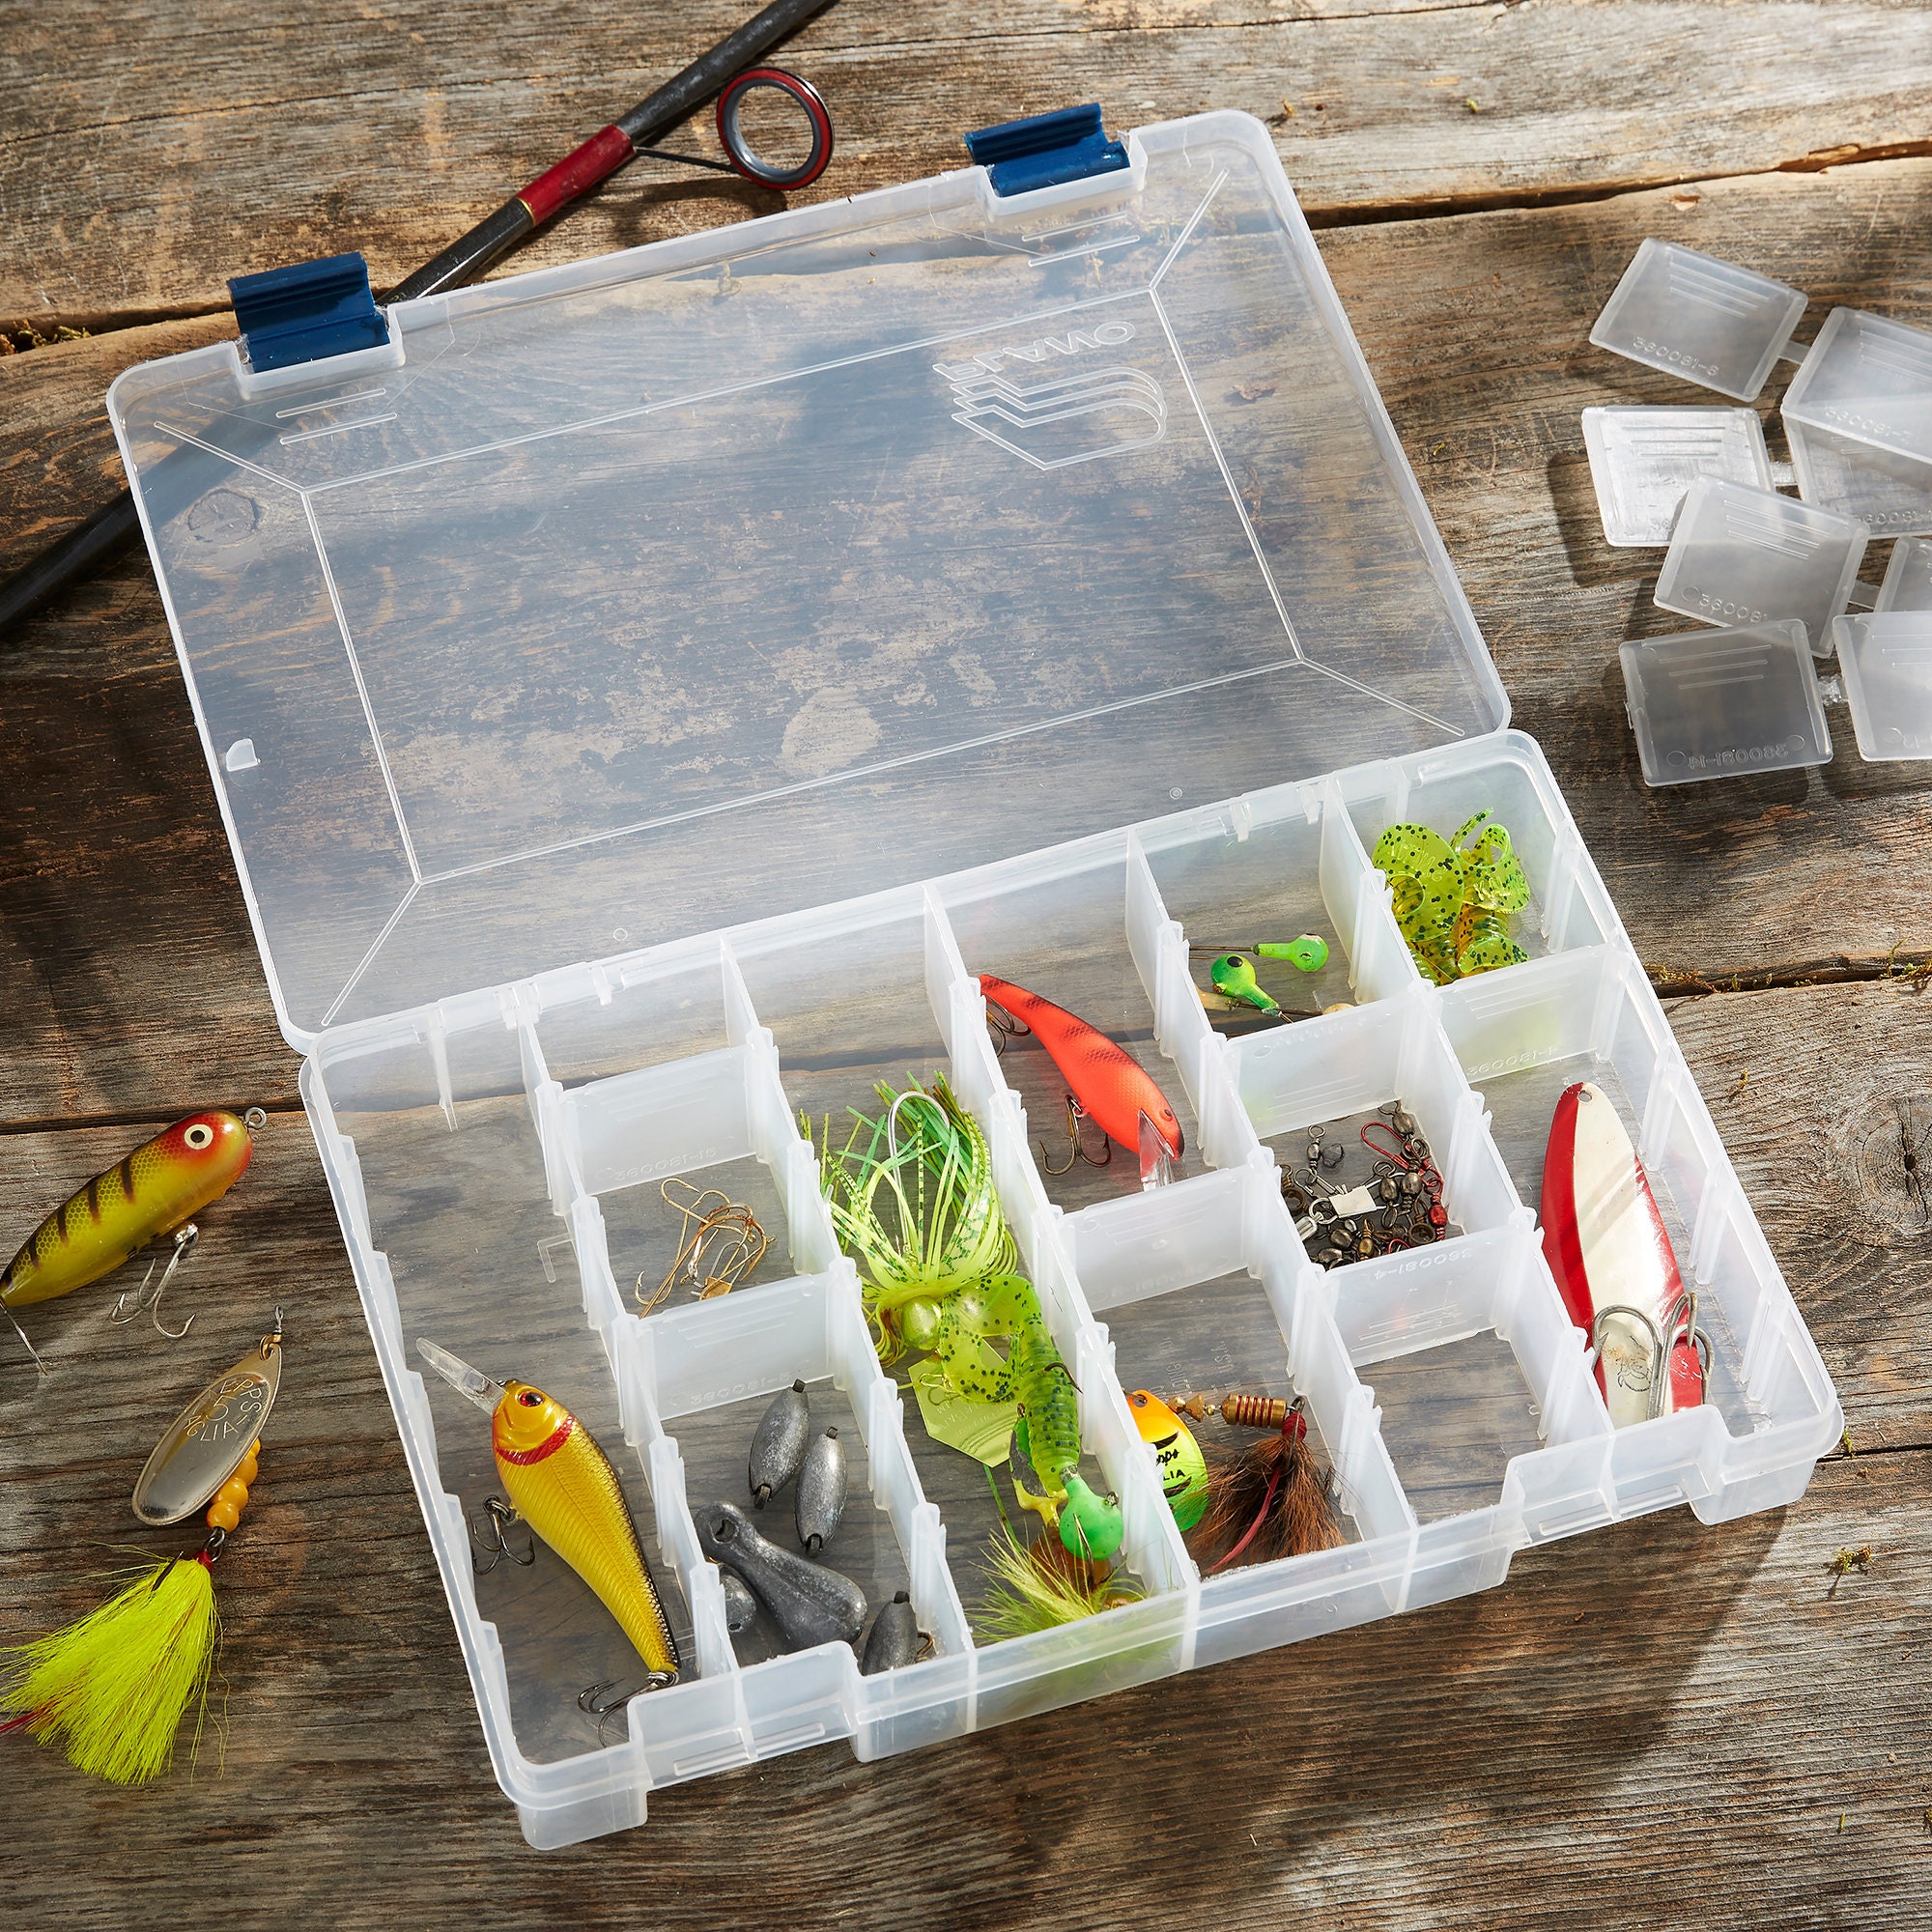 Promotional Personalized Fishing Tackle Box $4.99